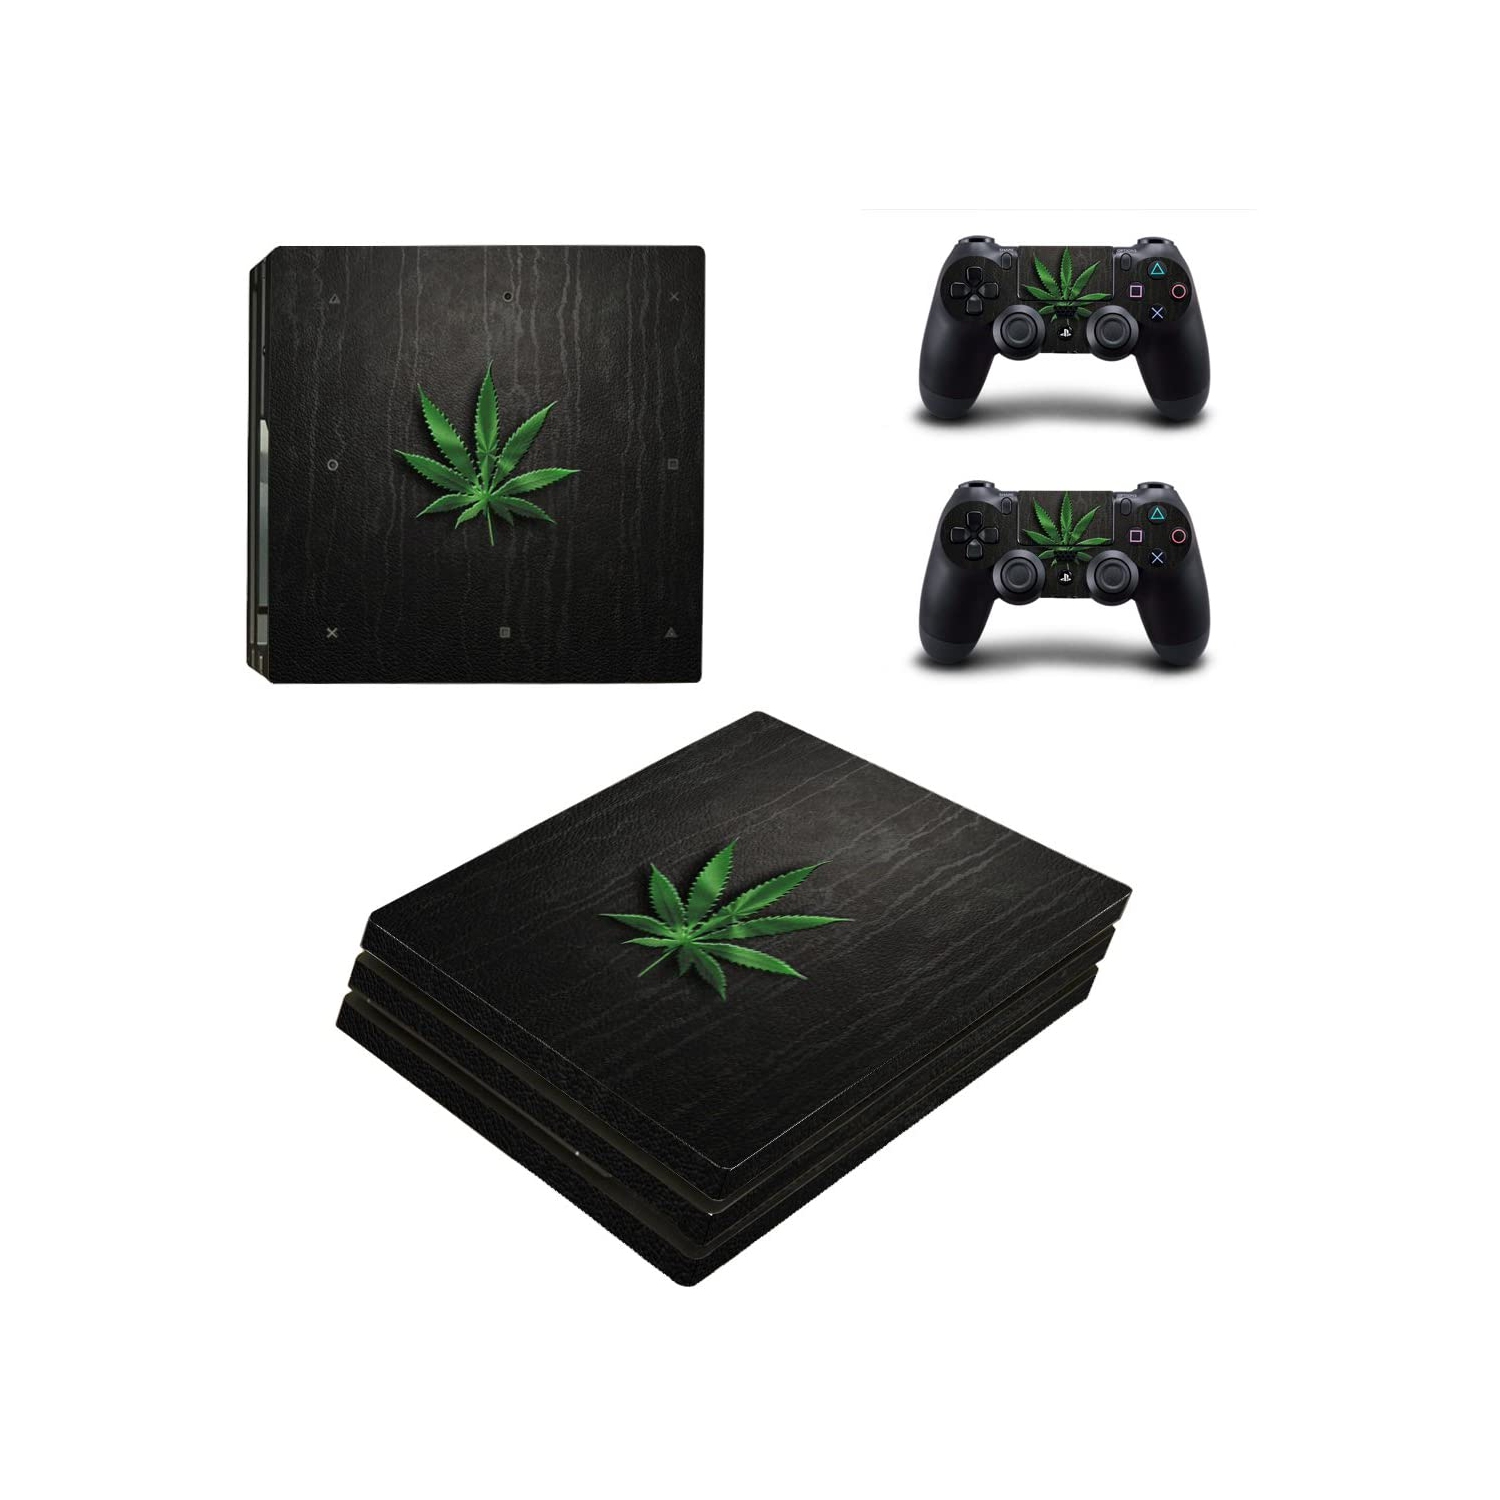 PS4 Pro Skin Vinyl Decal Cover for Sony PlayStation PRO Console Sticker Weeds Black